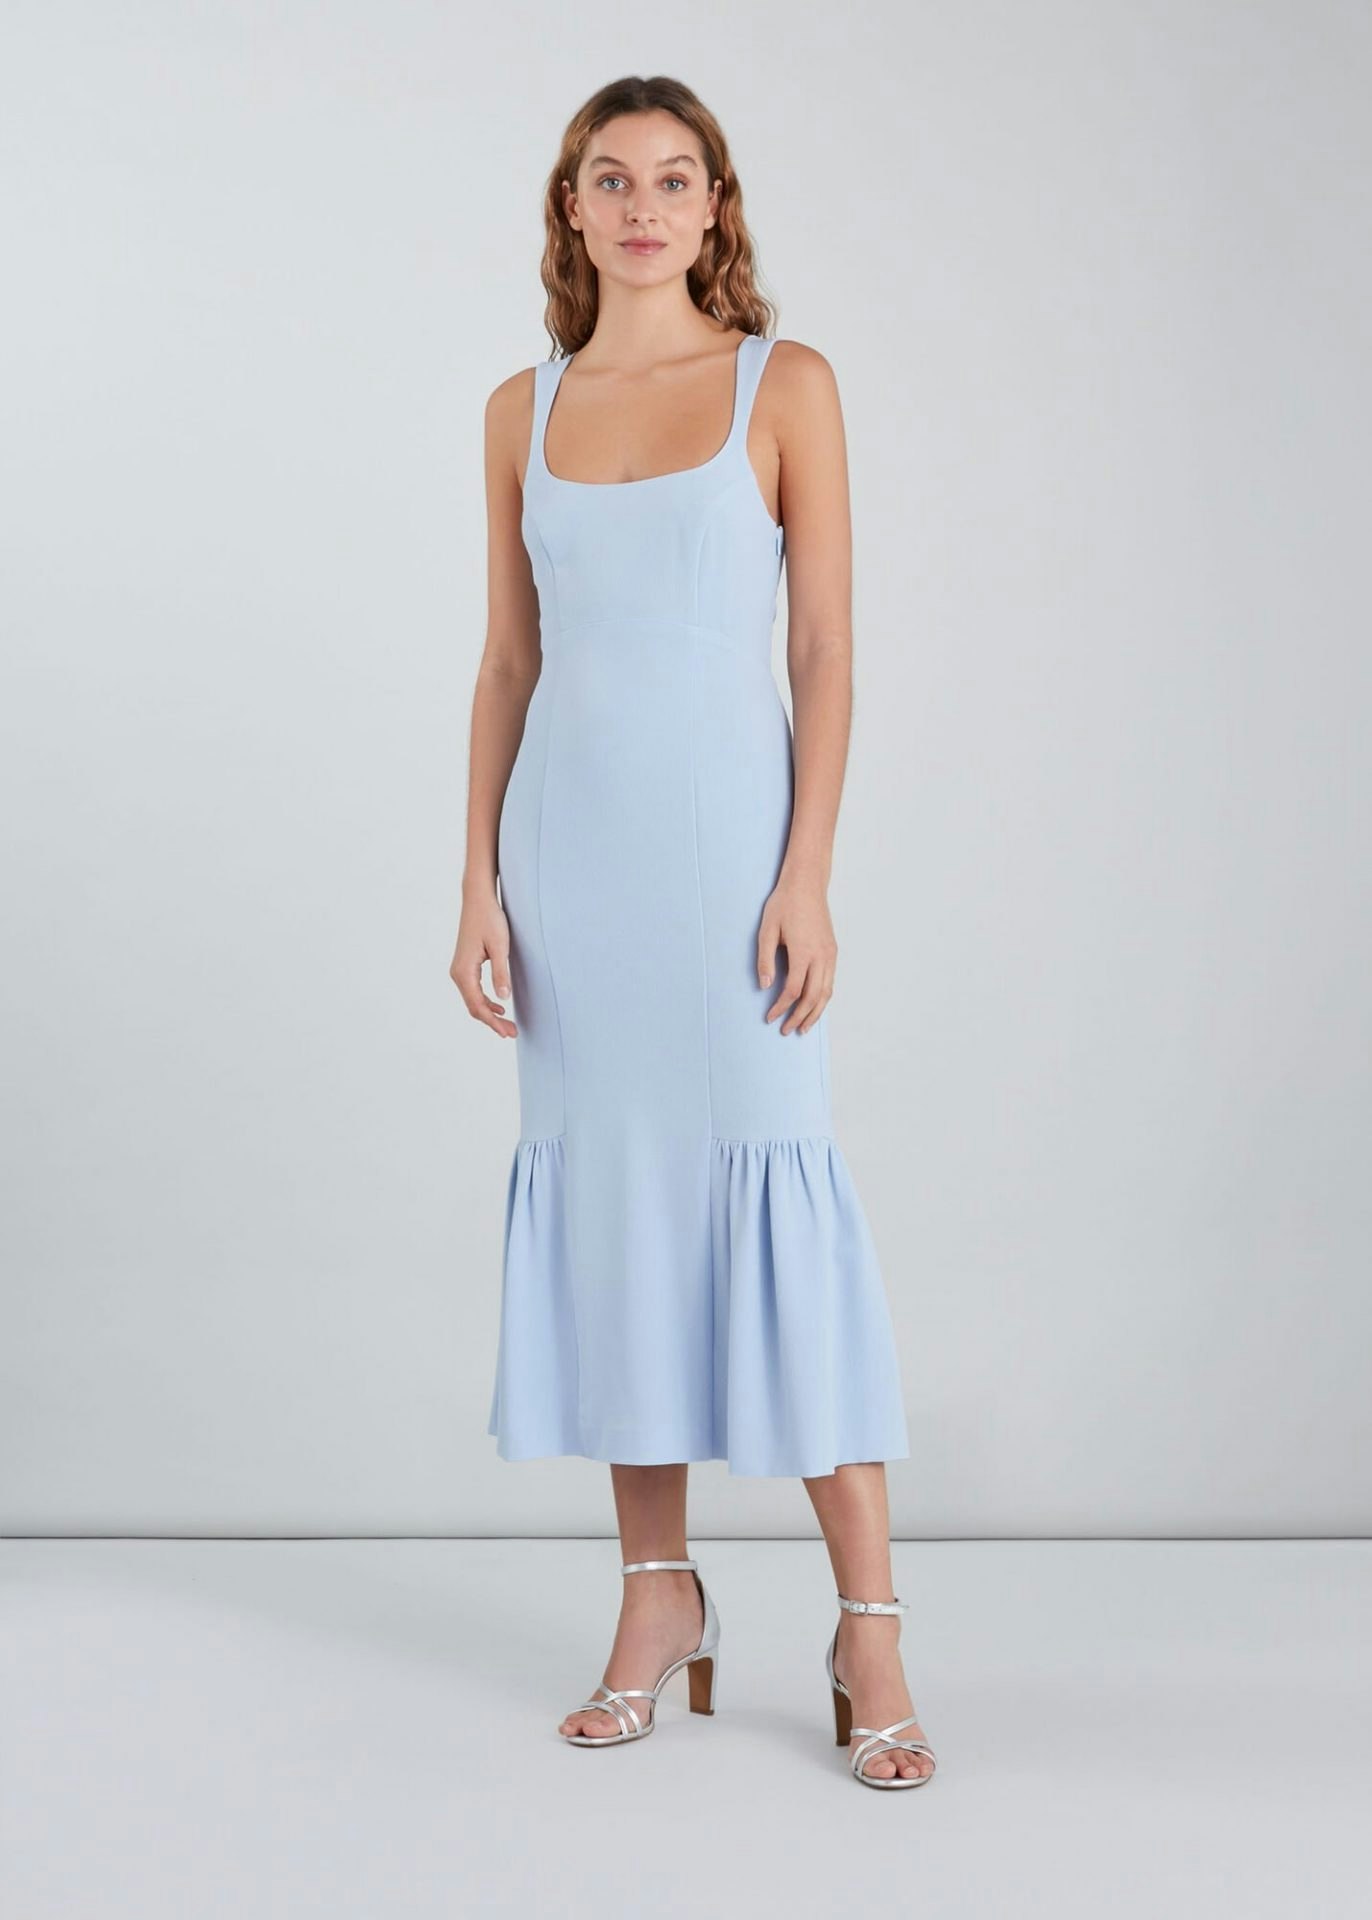 13 pale blue dresses to wear for spring ...